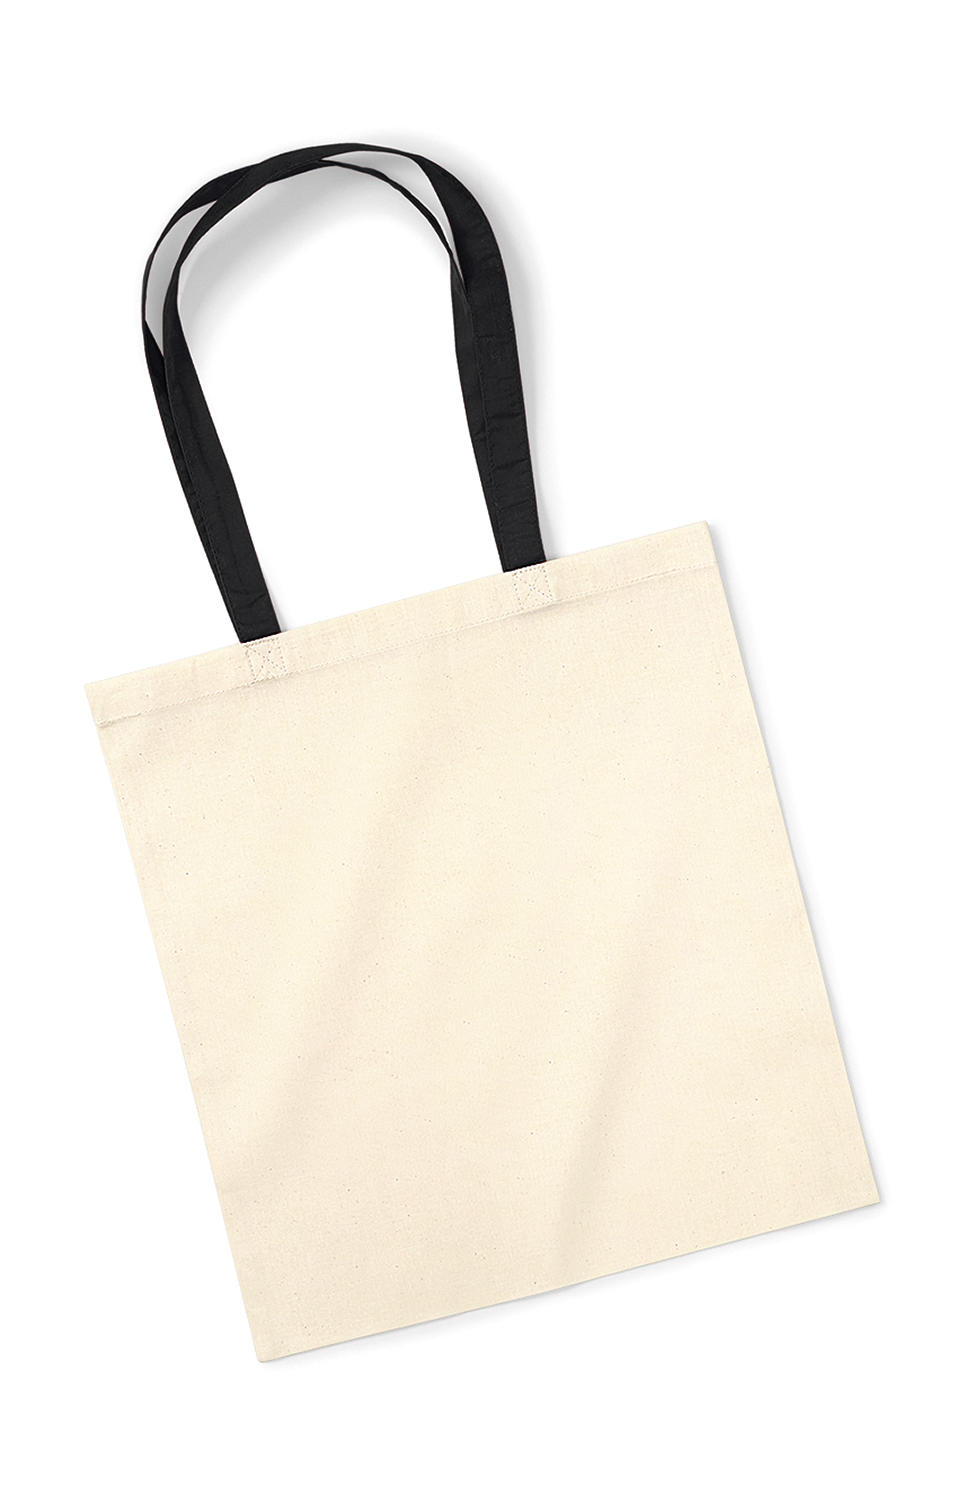  Bag for Life - Contrast Handles in Farbe Natural/Black